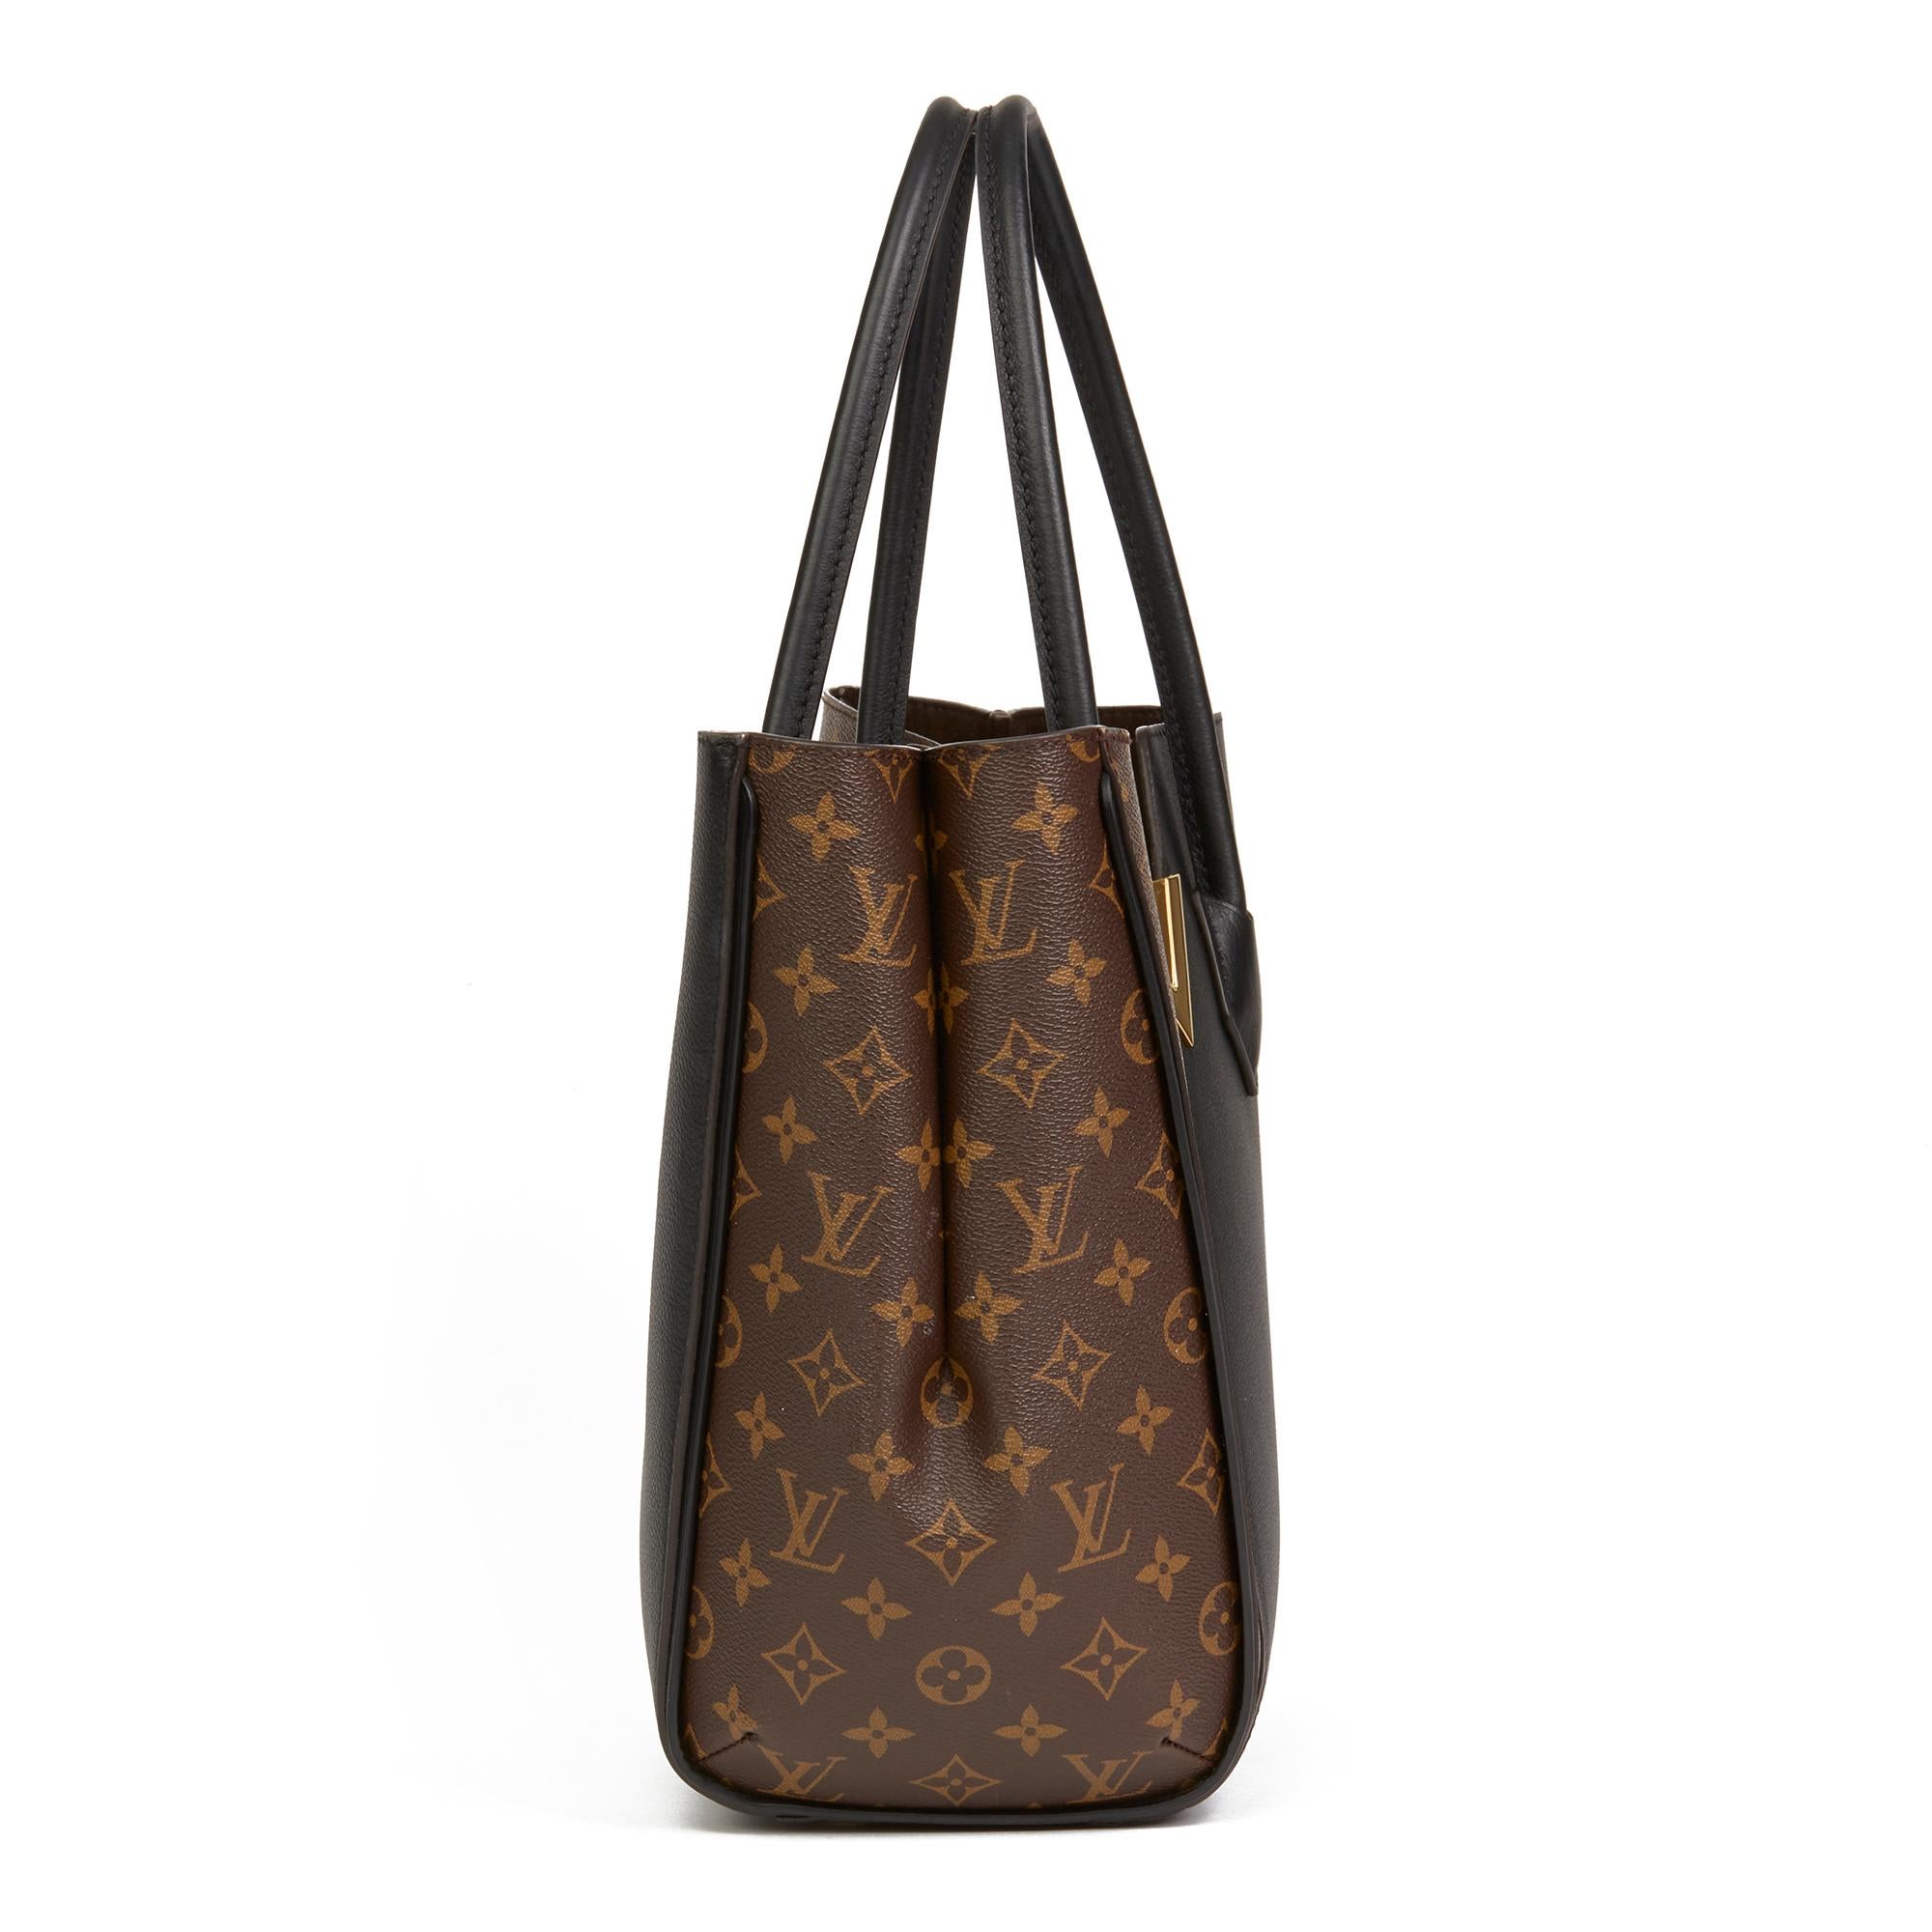 LOUIS VUITTON
Brown Monogram Coated Canvas & Black Calfskin Leather Kimono MM

Reference: HB2514
Serial Number: DU0127
Age (Circa): 2017
Accompanied By: Louis Vuitton Dust Bag, Care Booklet, Invoice
Authenticity Details: Date Stamp (Made in